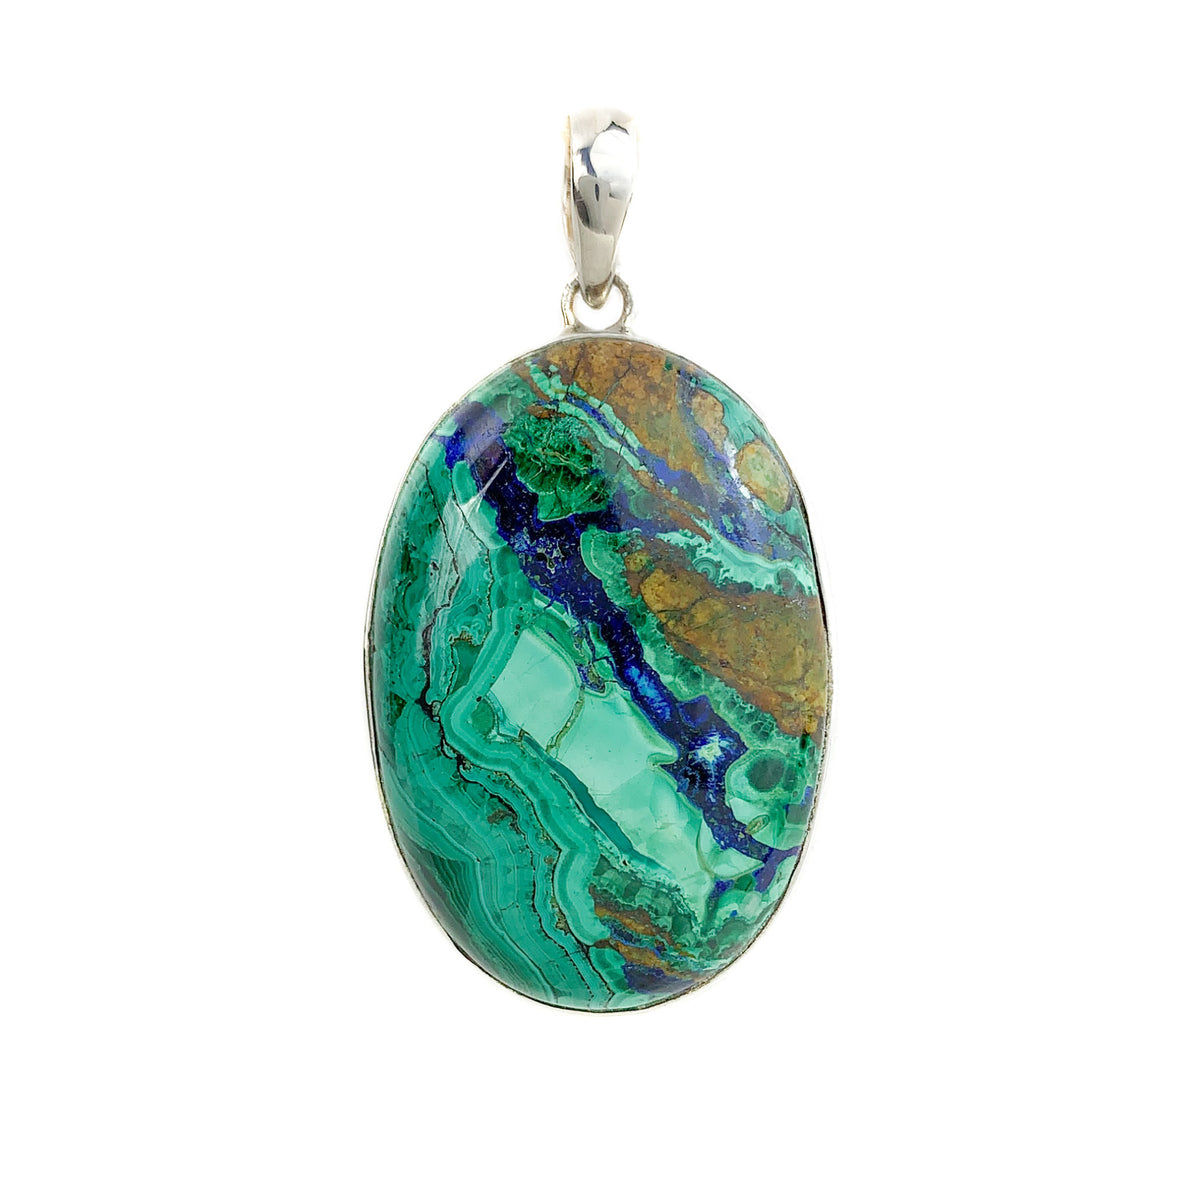 Azurite and Malachite Stone Necklace Set in Sterling Silver